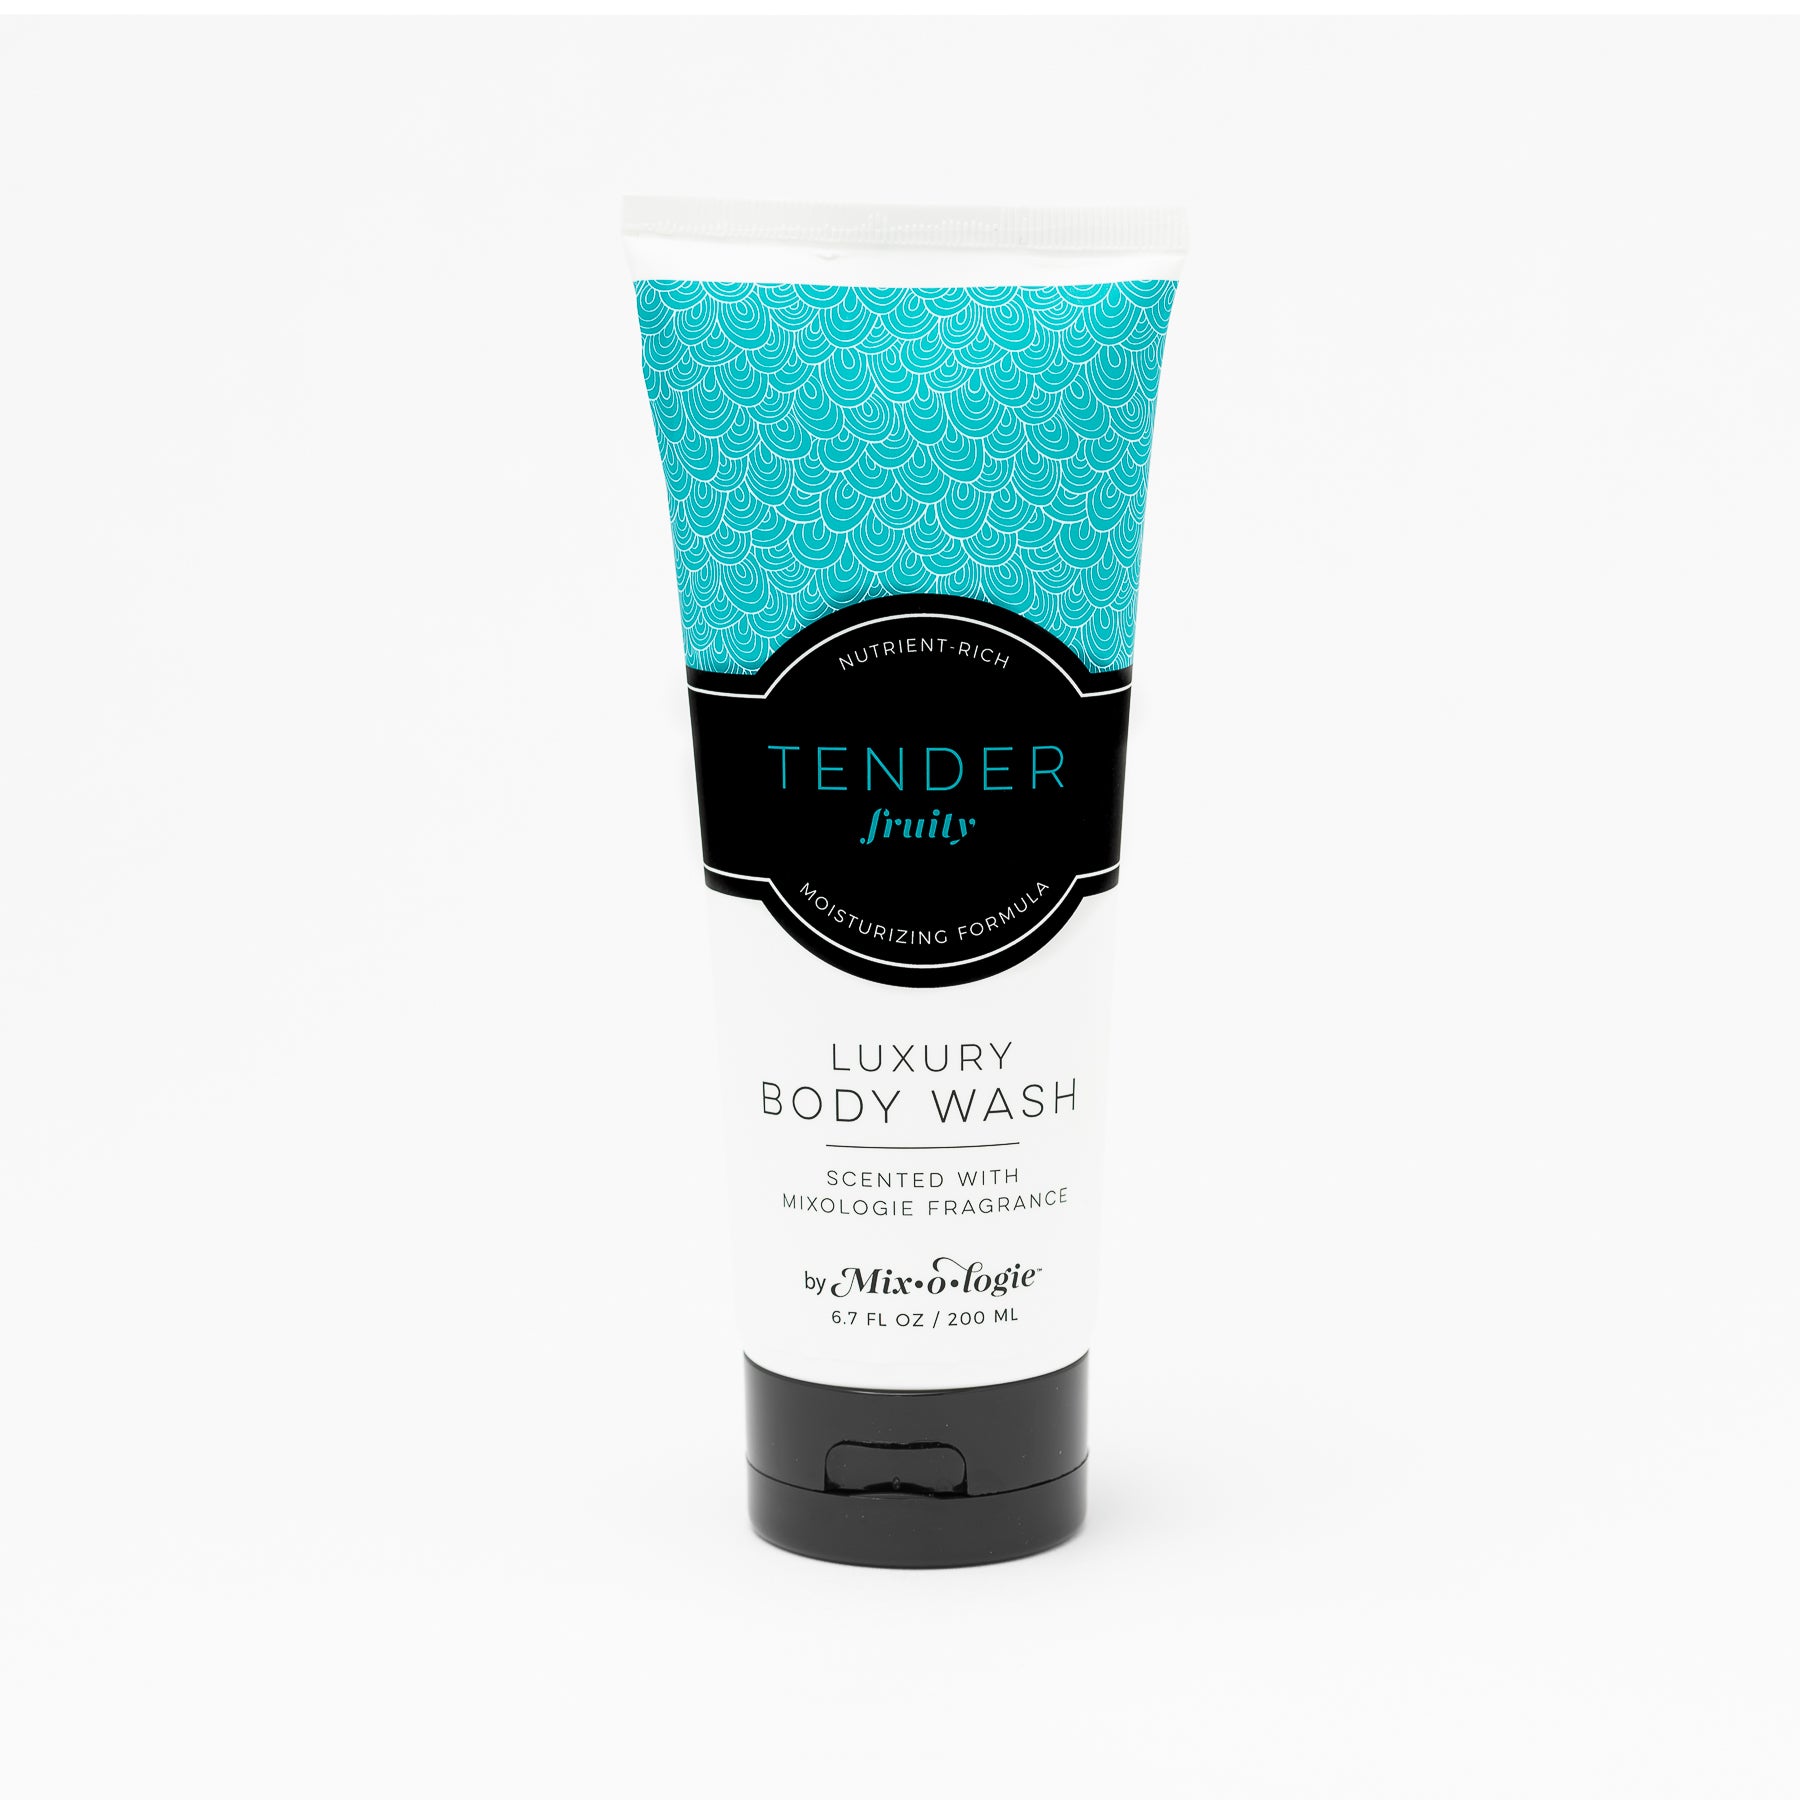 Luxury Body Wash in Mixologie’s Tender (Fruity) in bright blue color sample package with black label. Contains 6.7 fl oz or 200 mL pictured on a white background. 